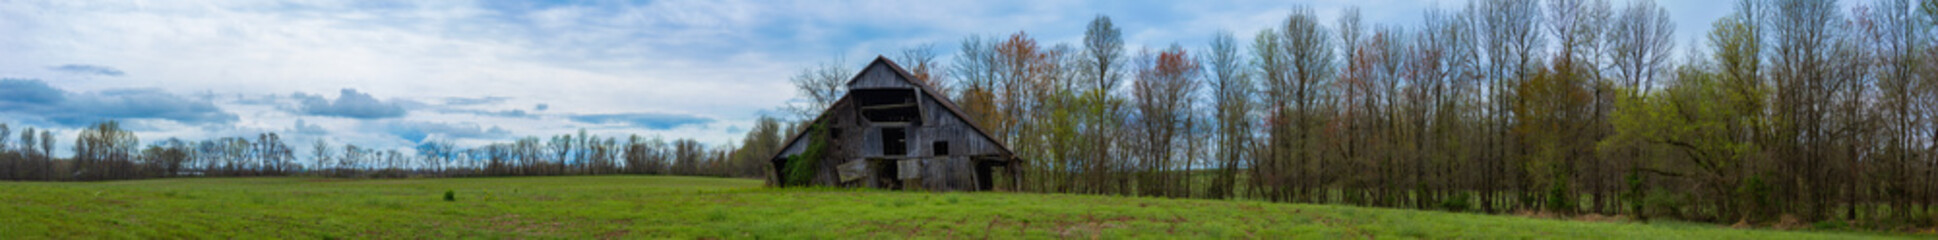 Panorama of an Old Abandoned Barn